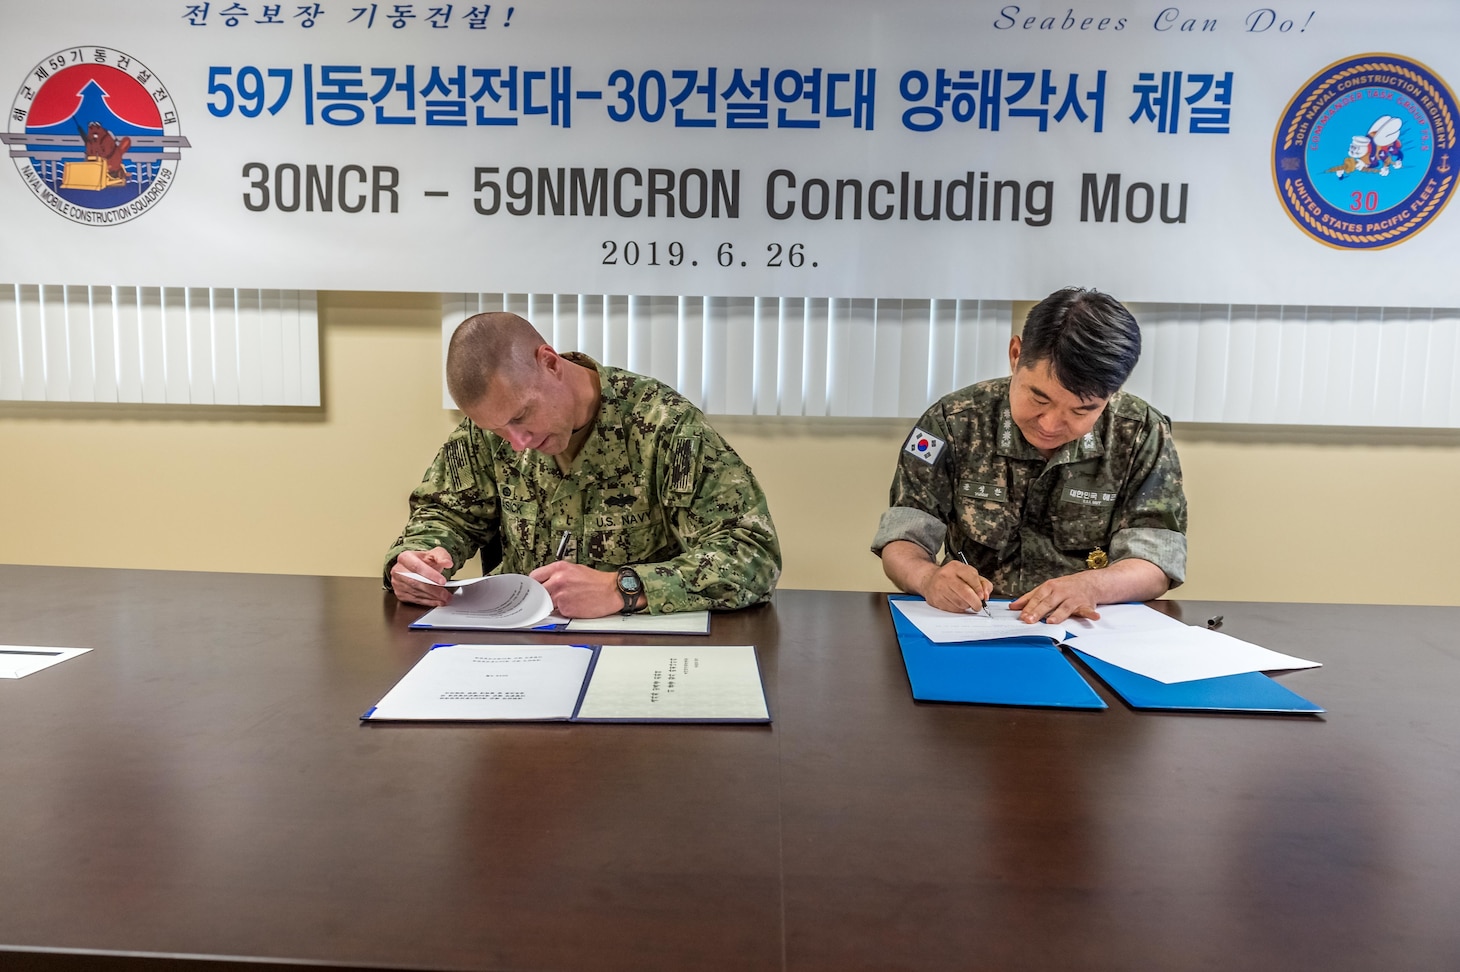 SANTA RITA, Guam (June 26, 2019) Capt. Steve Stasick, Commodore 30th Naval Construction Regiment (30 NCR) and Republic of Korea Navy Capt. Seok Han Yoon, Commodore Naval Mobile Construction Squadron (NMCRON) 59, sign a memorandum of understanding between the two units. The MOU is designed to strengthen the naval engineering capabilities between 30 NCR and NMCRON 59, leading to a tighter operational relationship that will prepare both units for any future contingency.